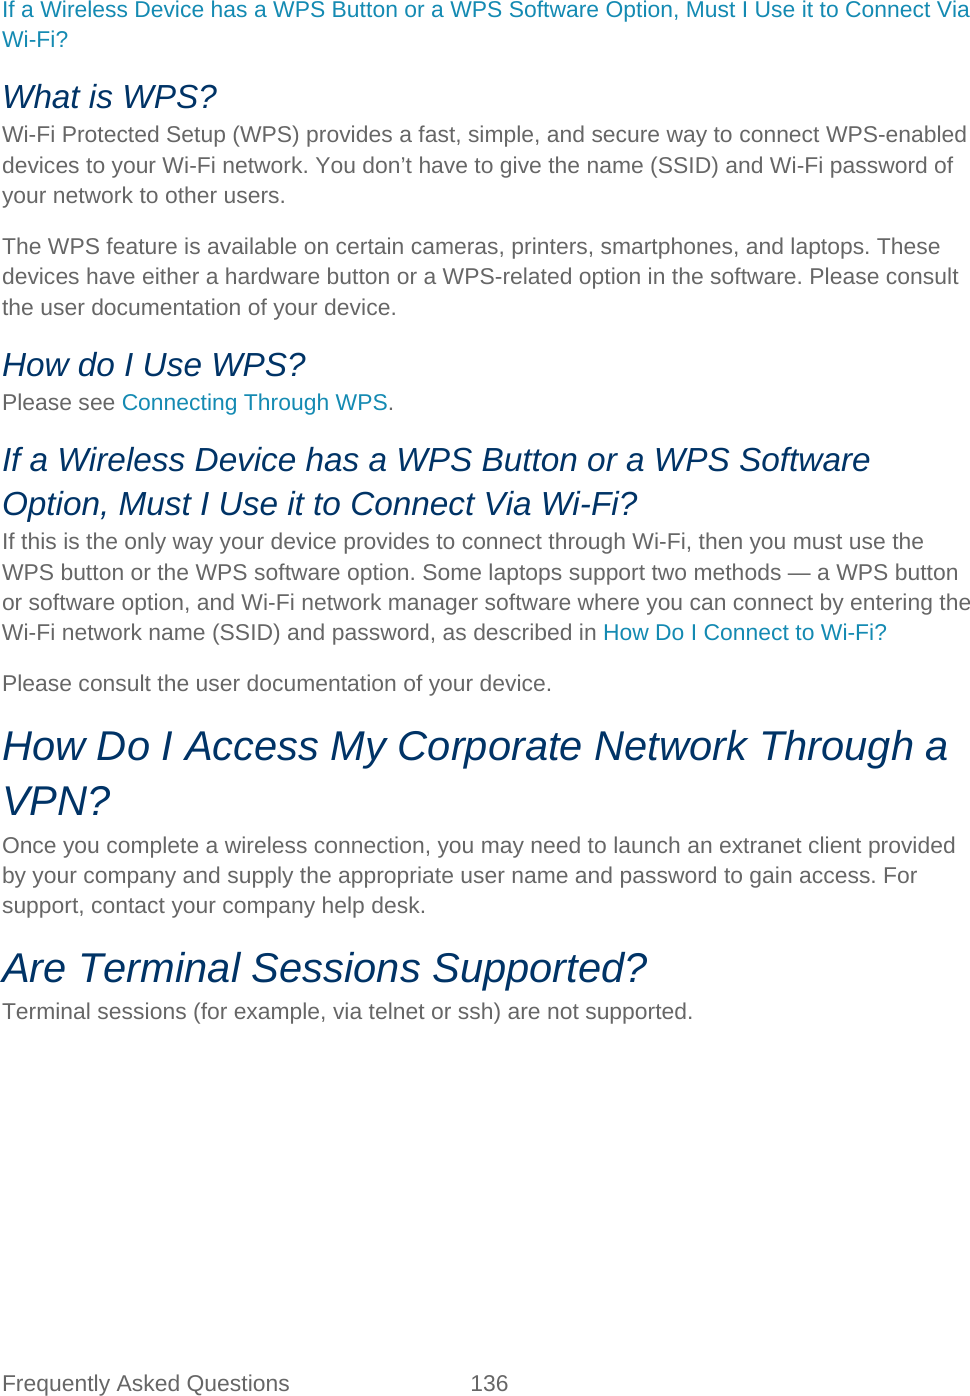 Frequently Asked Questions 136   If a Wireless Device has a WPS Button or a WPS Software Option, Must I Use it to Connect Via Wi-Fi? What is WPS? Wi-Fi Protected Setup (WPS) provides a fast, simple, and secure way to connect WPS-enabled devices to your Wi-Fi network. You don’t have to give the name (SSID) and Wi-Fi password of your network to other users. The WPS feature is available on certain cameras, printers, smartphones, and laptops. These devices have either a hardware button or a WPS-related option in the software. Please consult the user documentation of your device. How do I Use WPS? Please see Connecting Through WPS. If a Wireless Device has a WPS Button or a WPS Software Option, Must I Use it to Connect Via Wi-Fi? If this is the only way your device provides to connect through Wi-Fi, then you must use the WPS button or the WPS software option. Some laptops support two methods — a WPS button or software option, and Wi-Fi network manager software where you can connect by entering the Wi-Fi network name (SSID) and password, as described in How Do I Connect to Wi-Fi? Please consult the user documentation of your device. How Do I Access My Corporate Network Through a VPN? Once you complete a wireless connection, you may need to launch an extranet client provided by your company and supply the appropriate user name and password to gain access. For support, contact your company help desk. Are Terminal Sessions Supported? Terminal sessions (for example, via telnet or ssh) are not supported. 